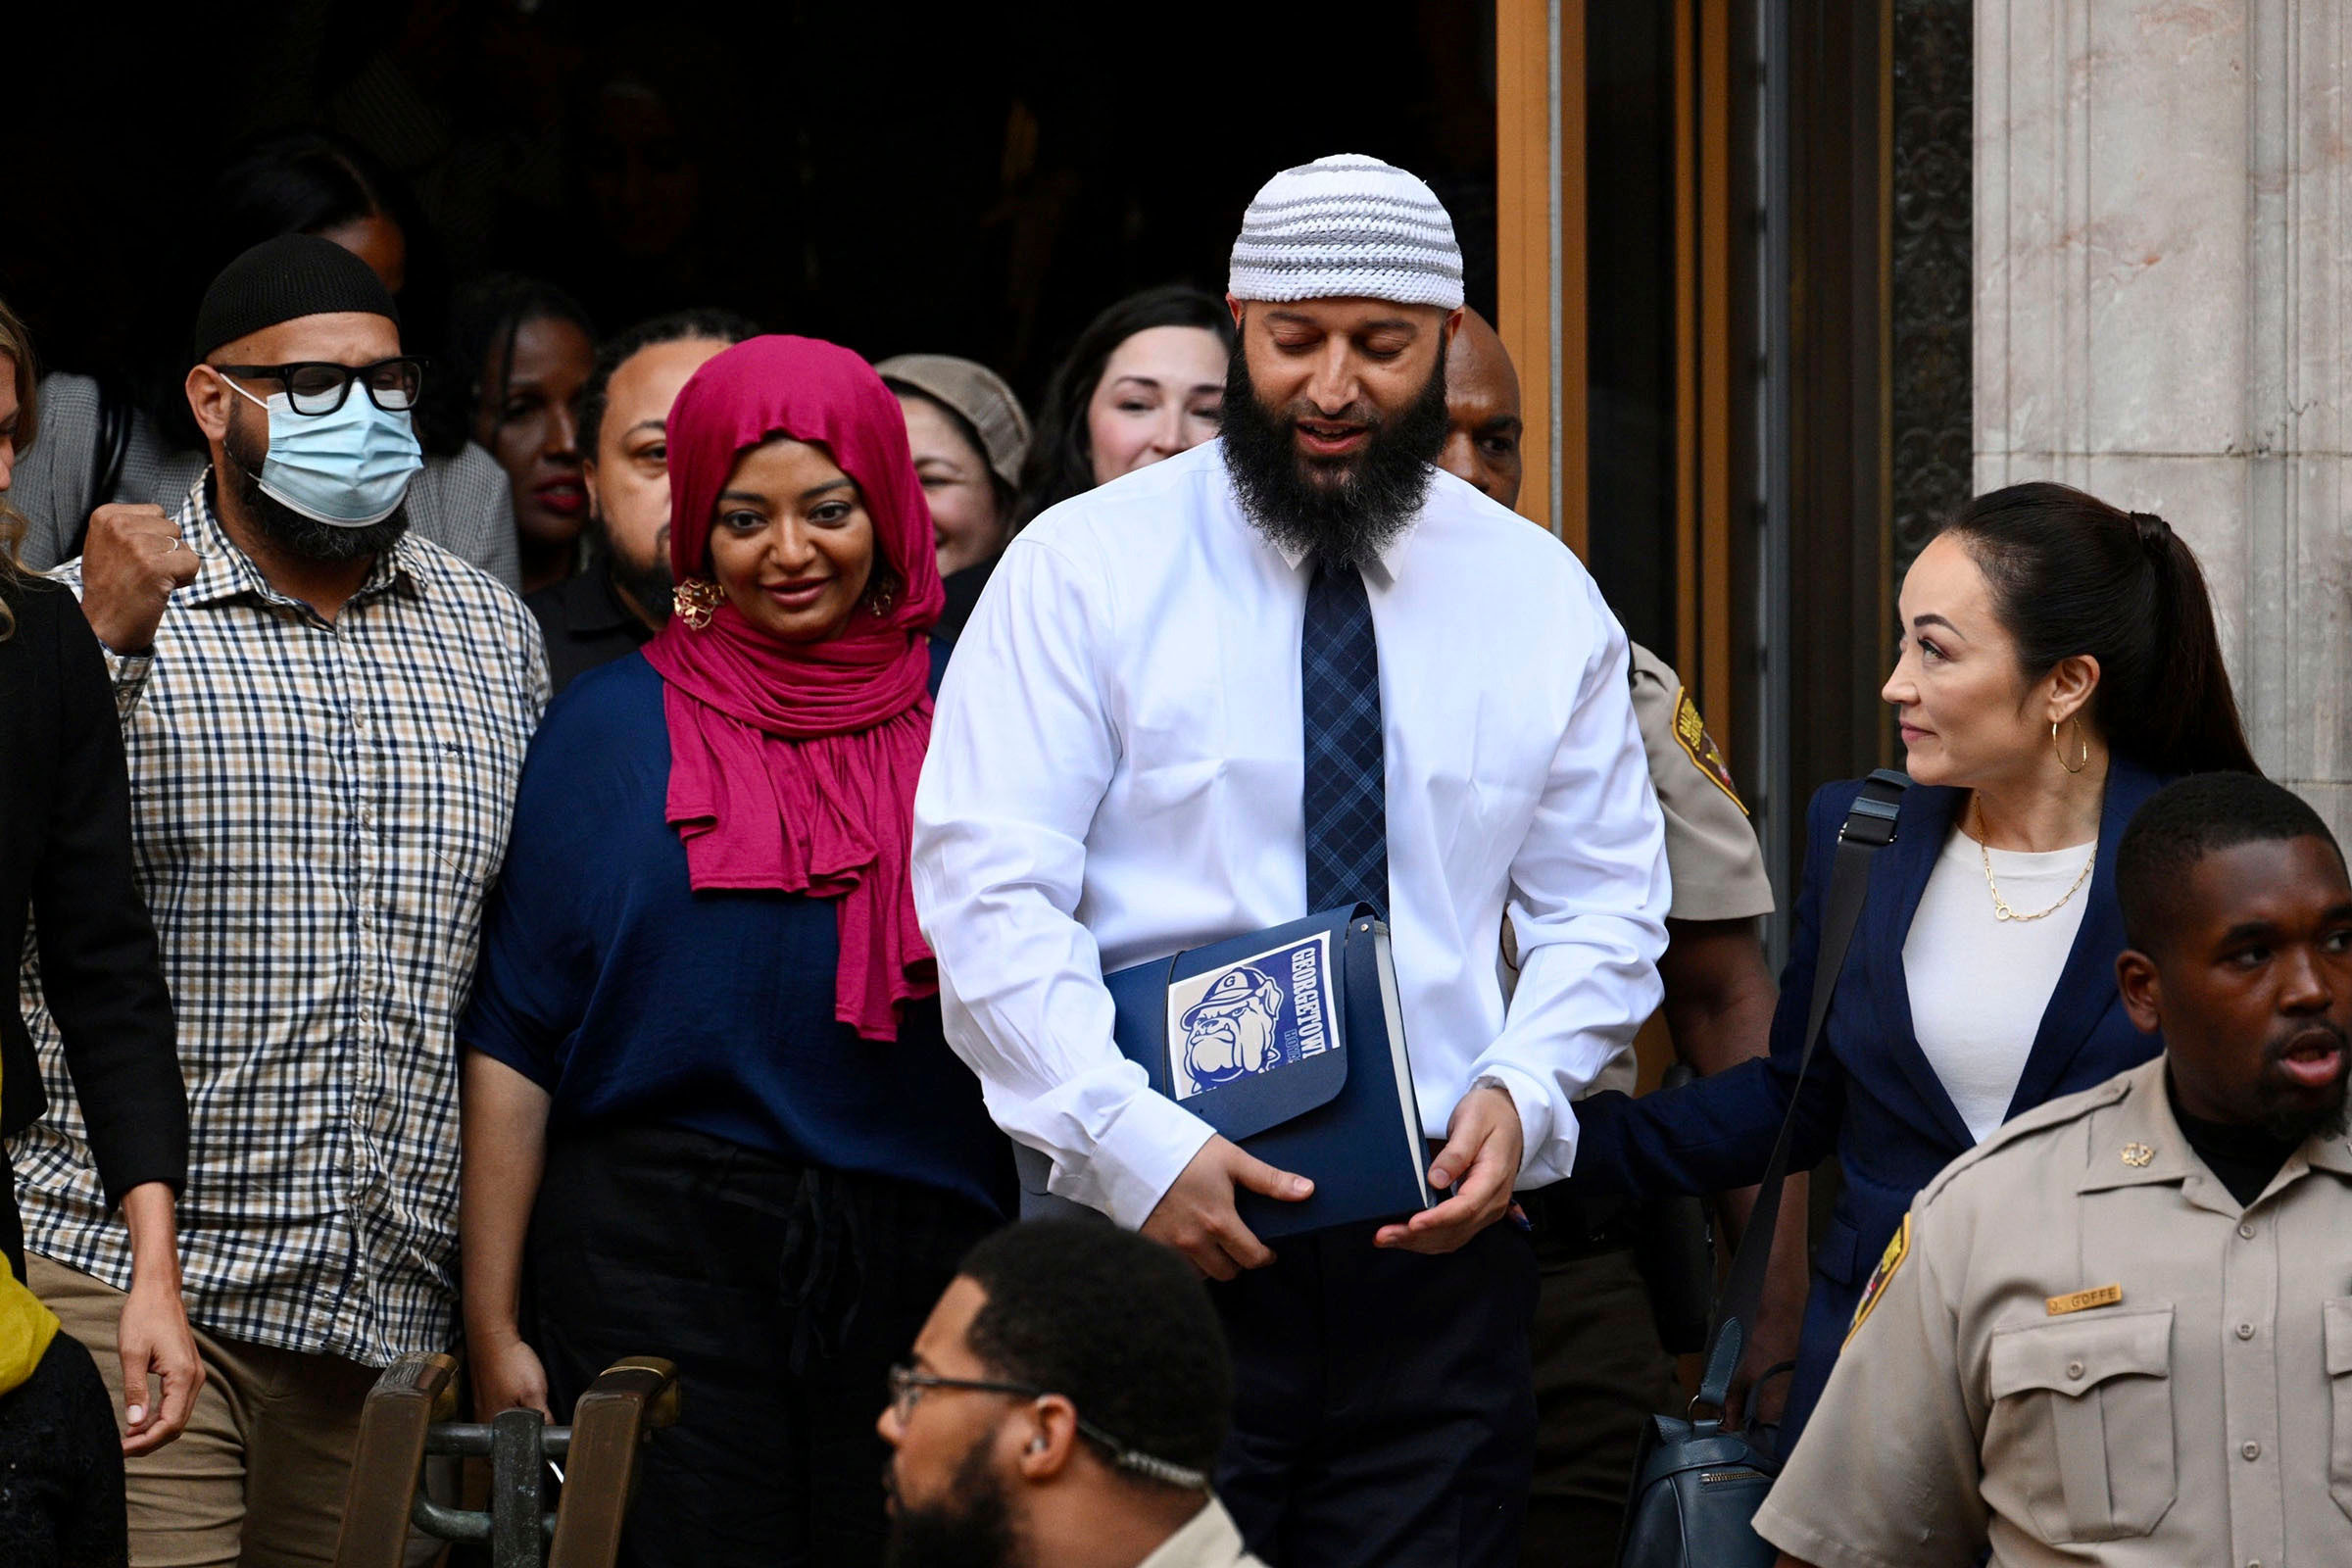 Adnan Syed walks out of court after decades-old conviction overturned: Watch